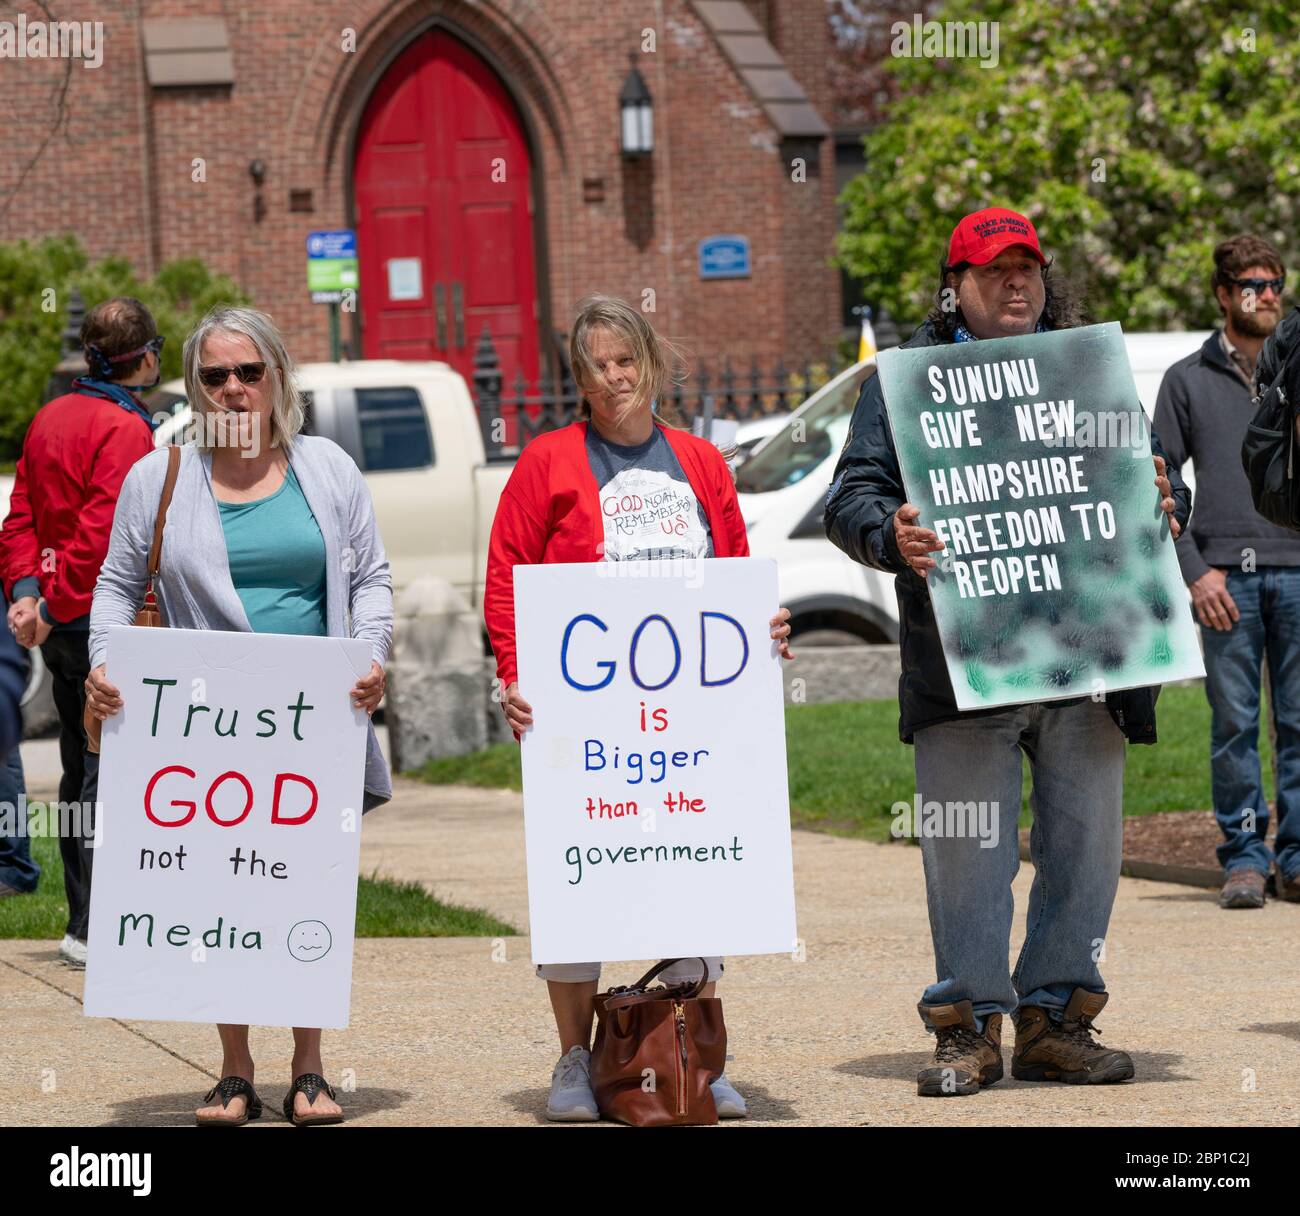 May 16, 2020, New Hampshire State House, Concord, New Hampshire, USA: Christians holding signs during a prayer rally organized by Reopen NH, to protest closed churches and New Hampshires ban on gatherings of more than 10 people amid COVID-19 pandemic at New Hampshire State House Plaza in Concord. Stock Photo